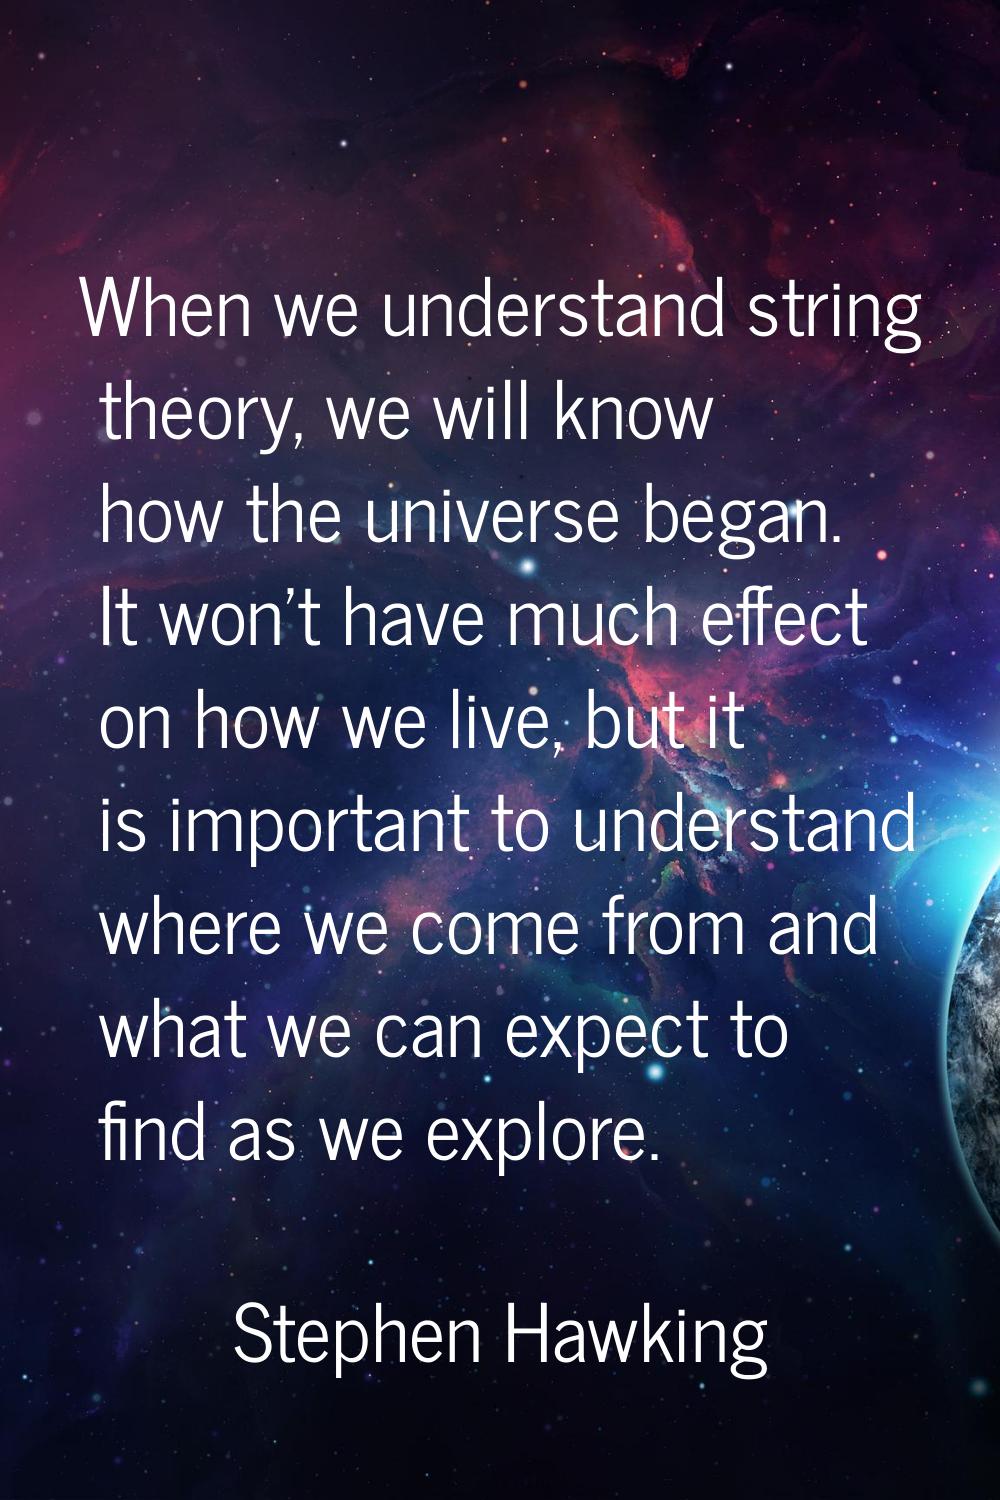 When we understand string theory, we will know how the universe began. It won't have much effect on